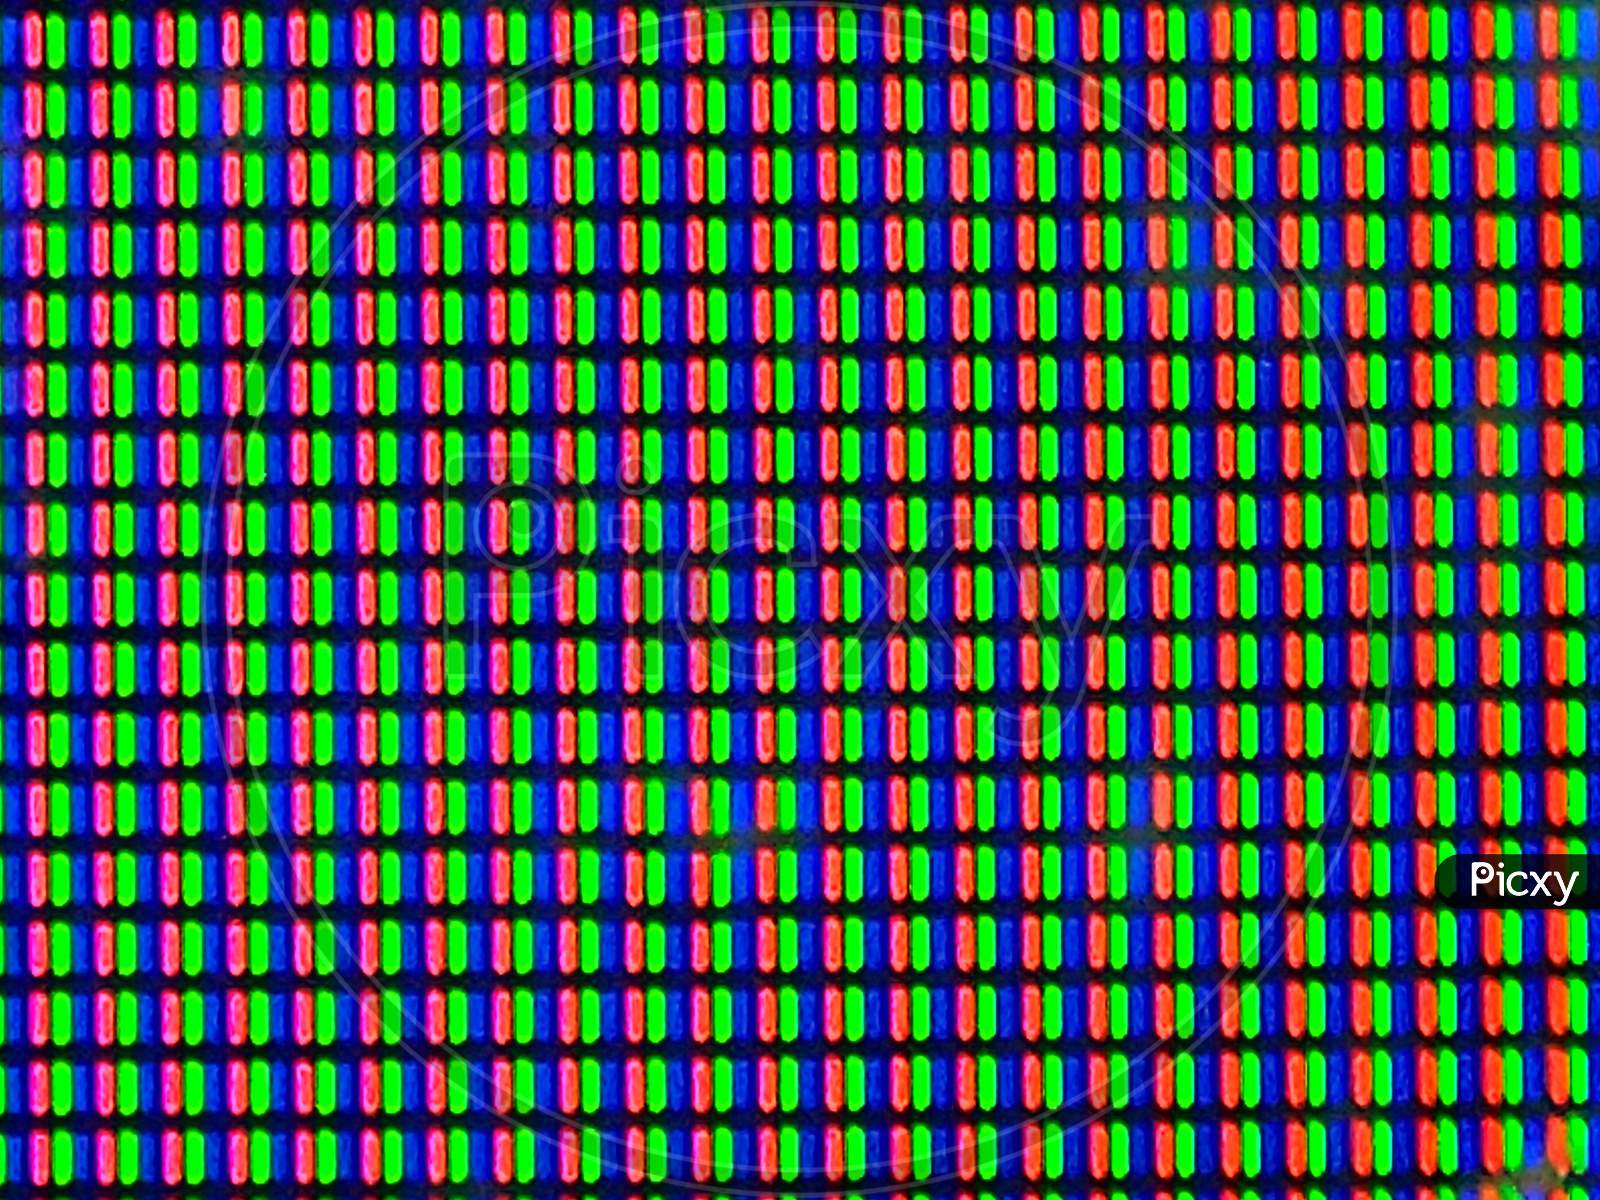 Display pixels extremely close up shot.